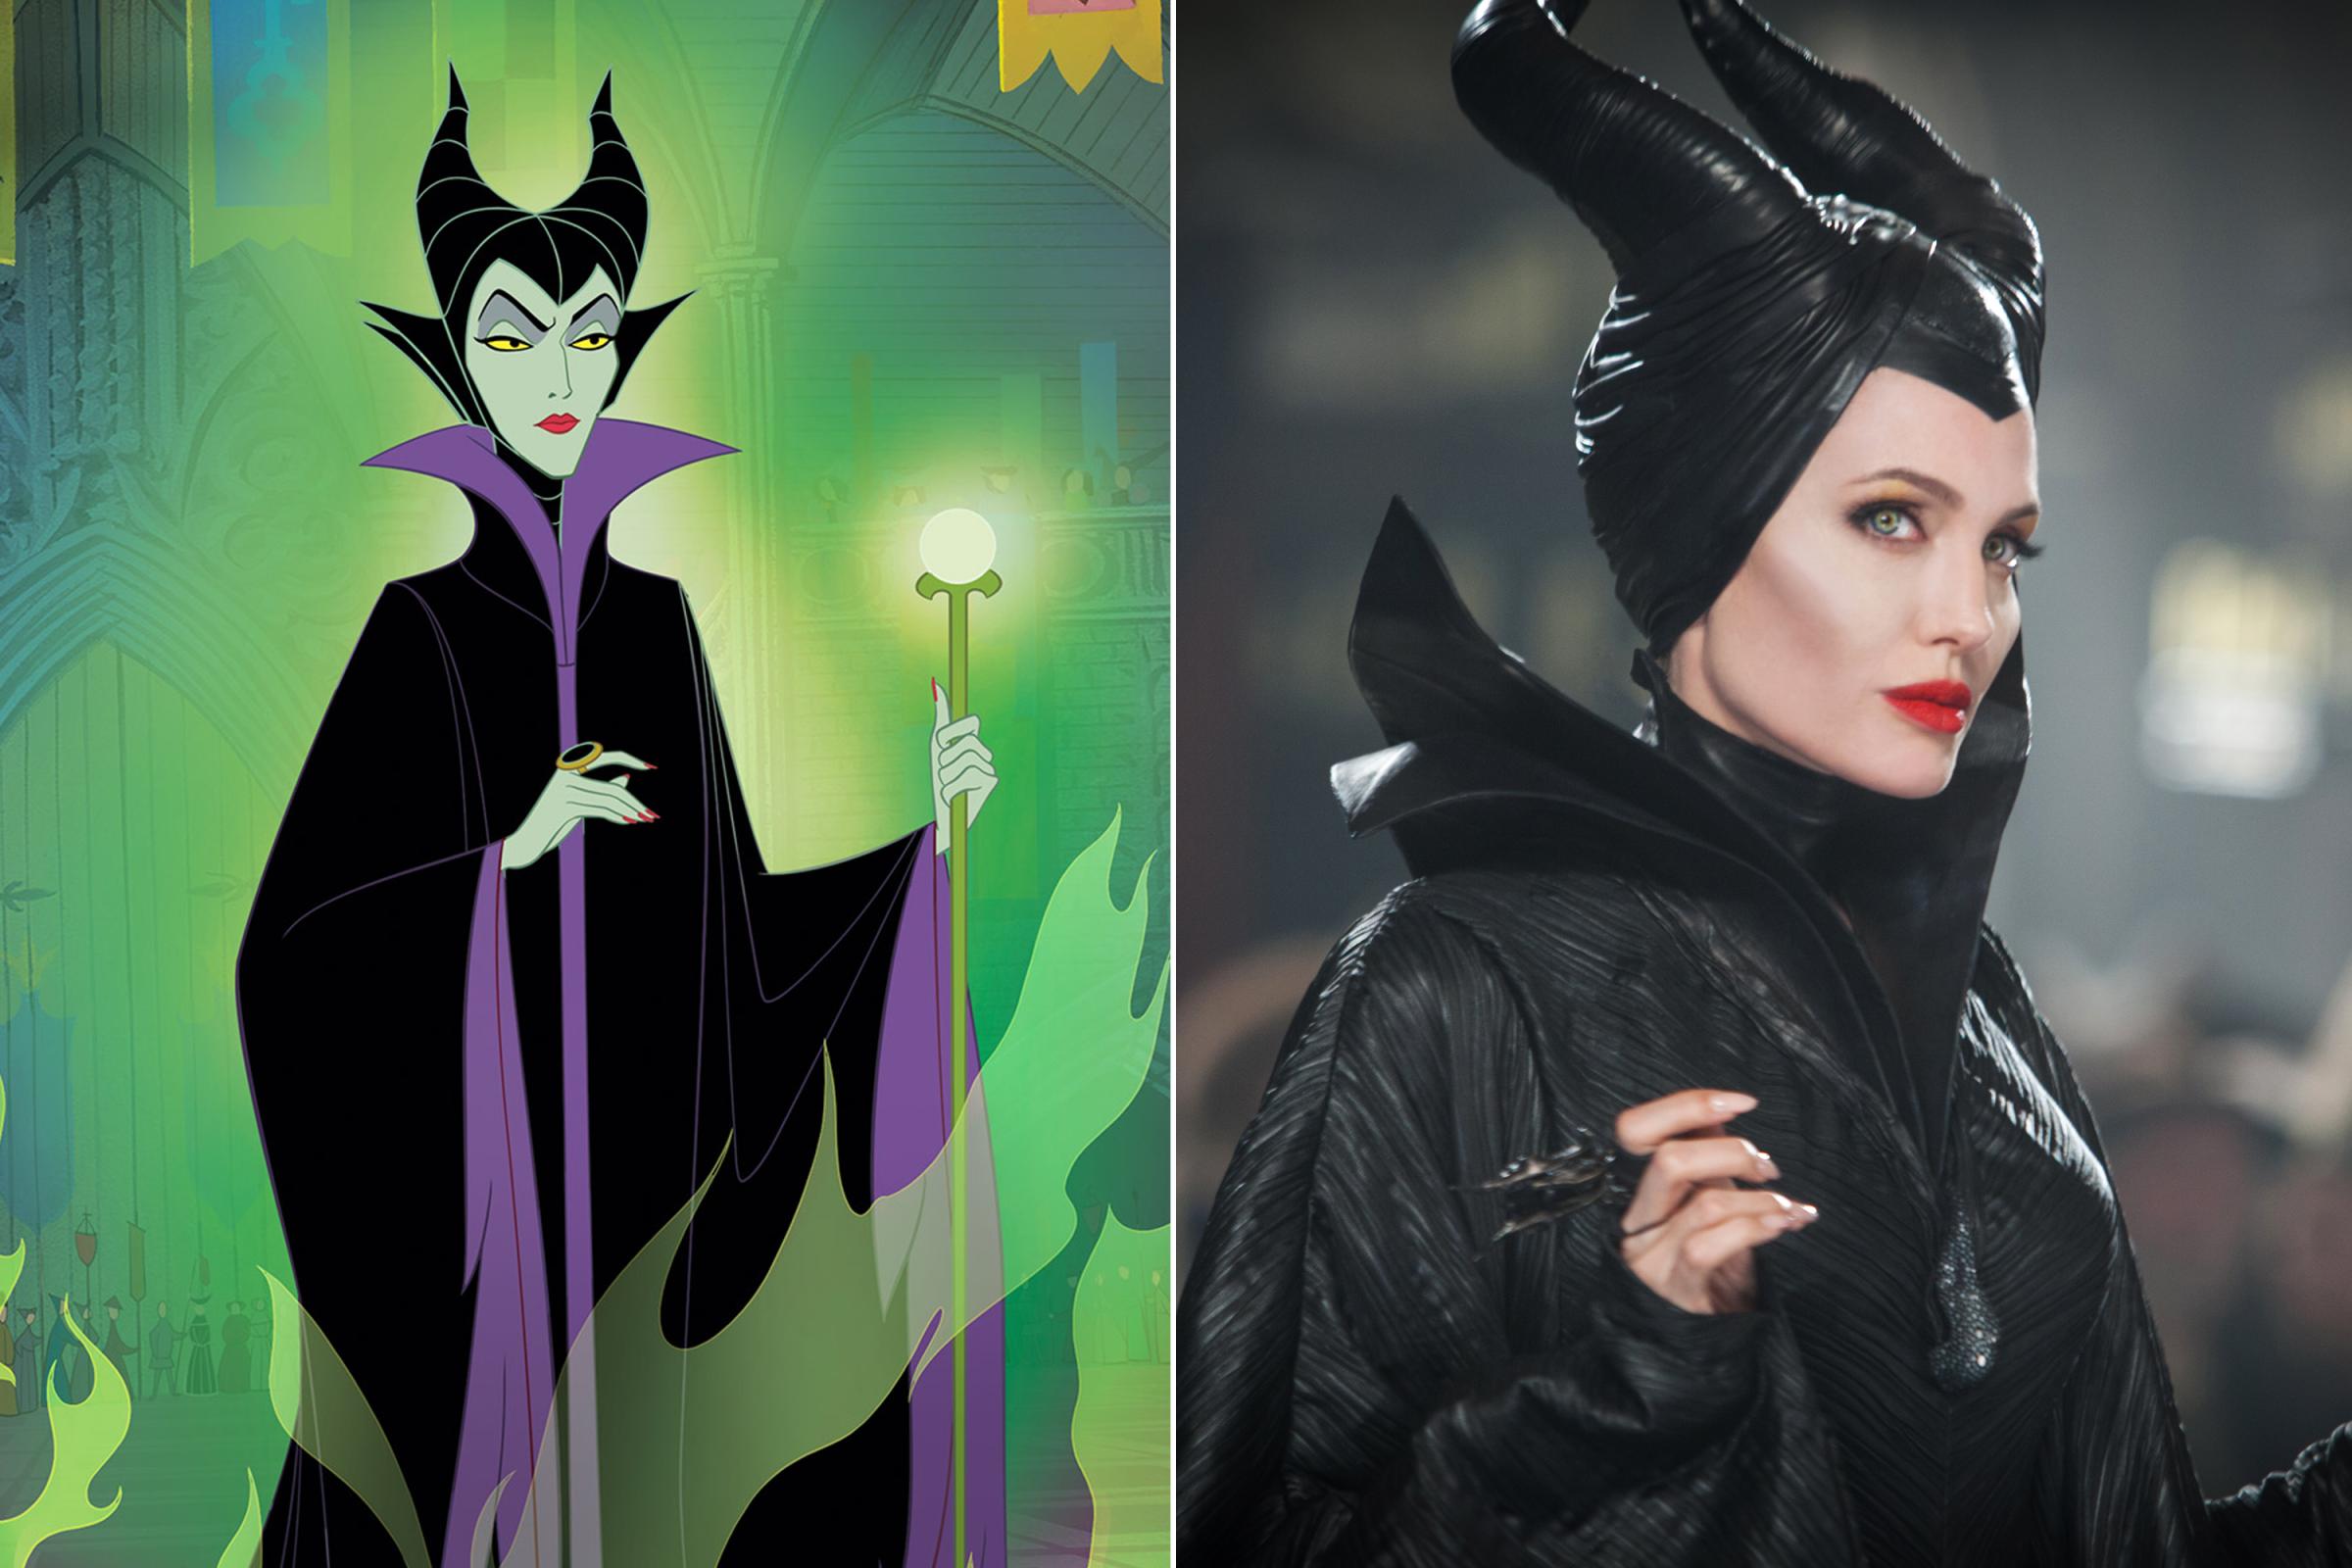 Sleeping Beauty, 1959 and Maleficent, 2014.